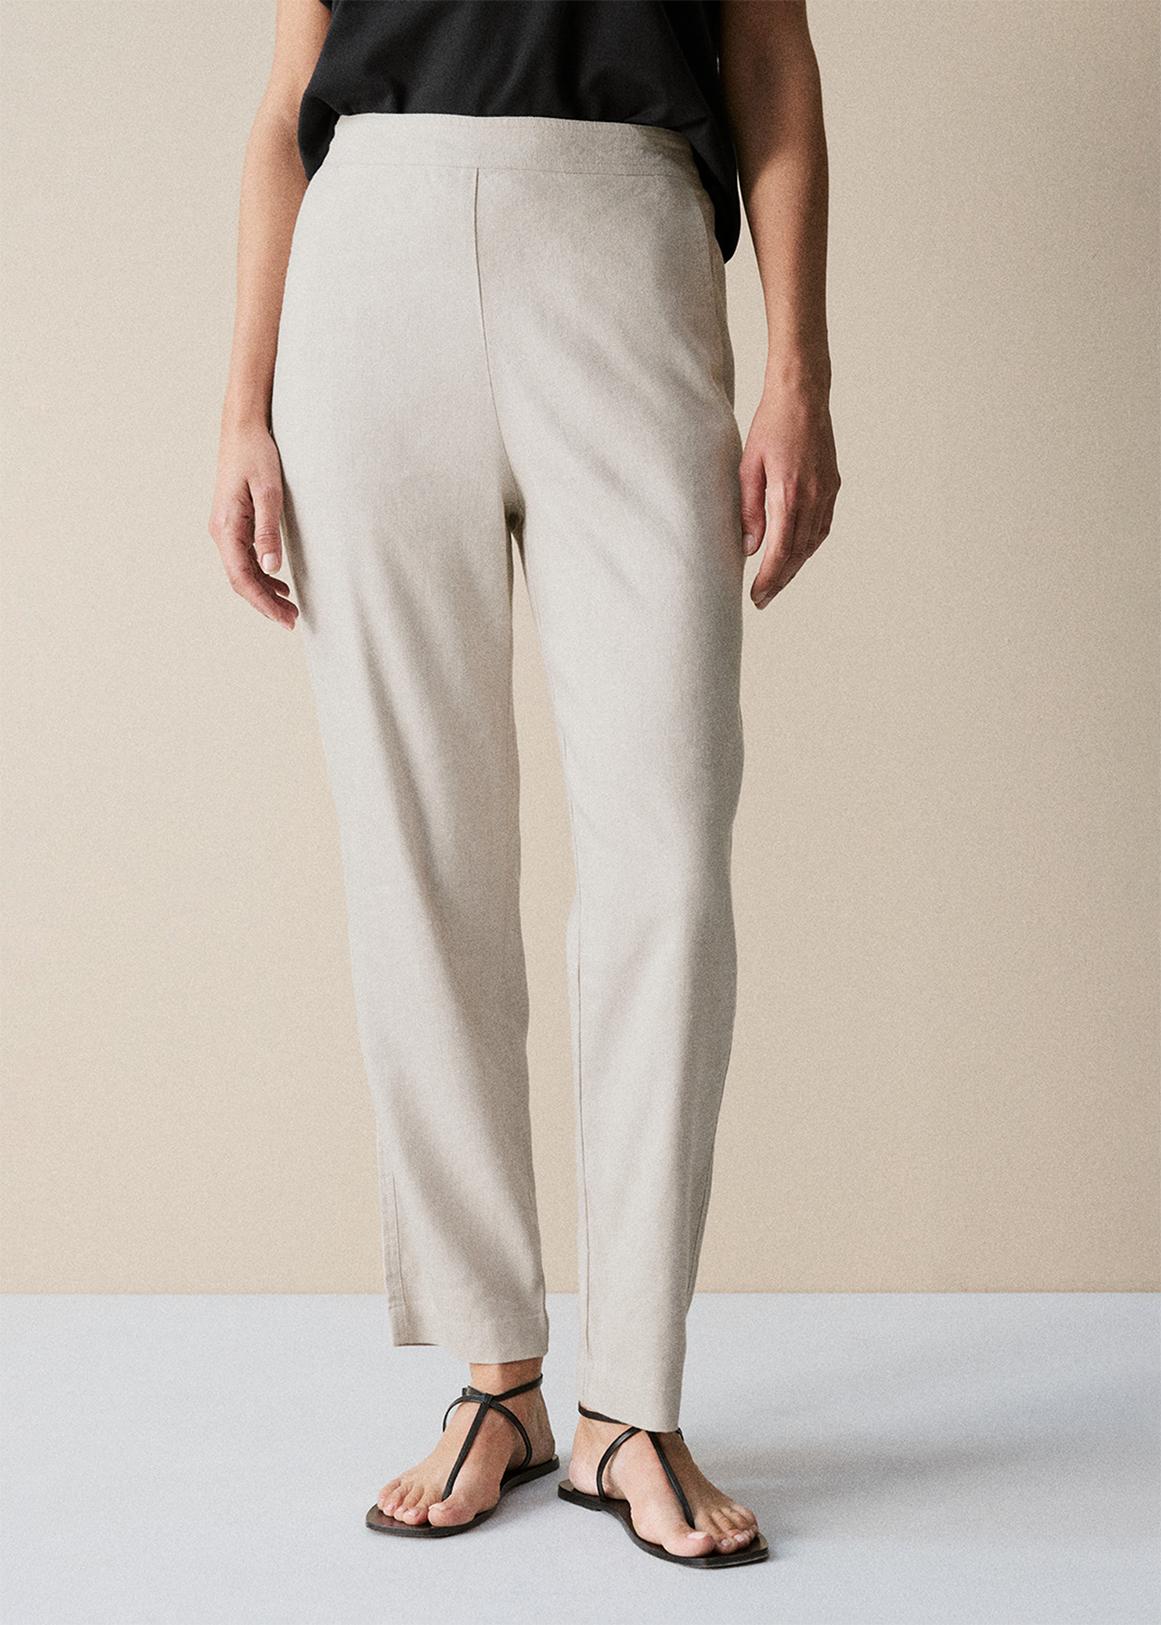 Yarn Dyed Stretch Linen Blend Pull On Pant